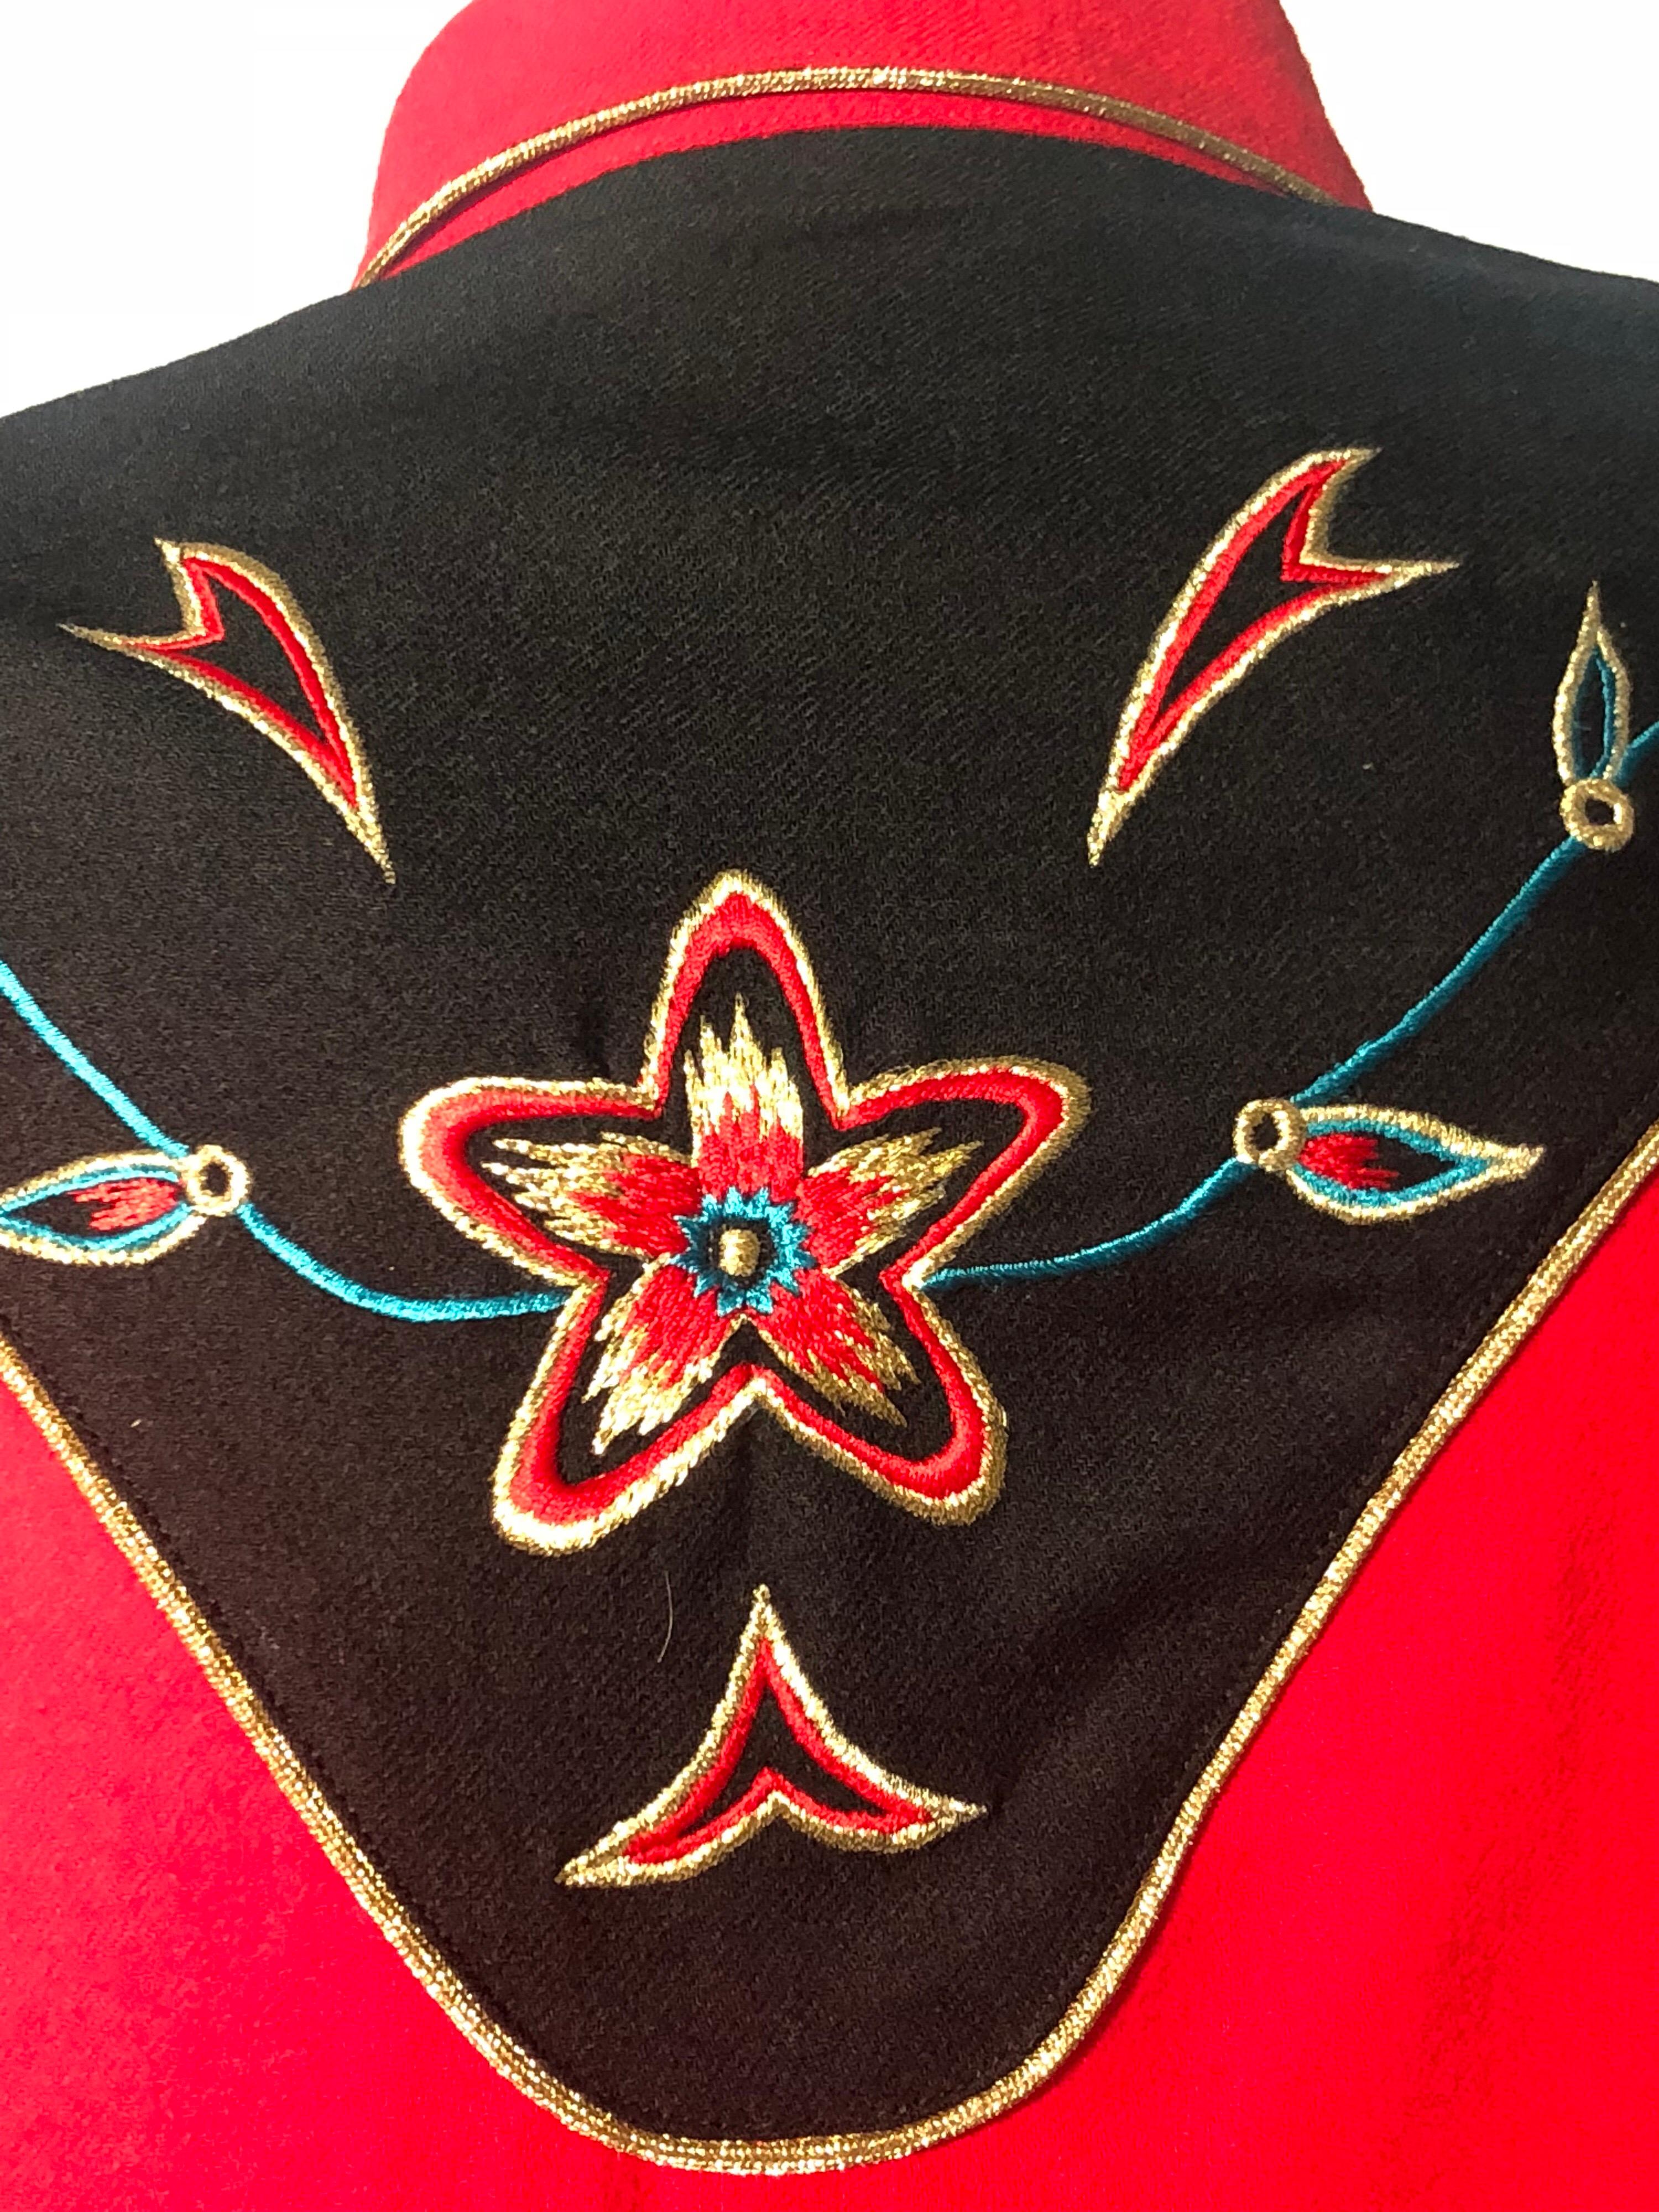 Red 1980s Kansai Yamamoto Retro-Styled Embroidered Western Shirt For Sale